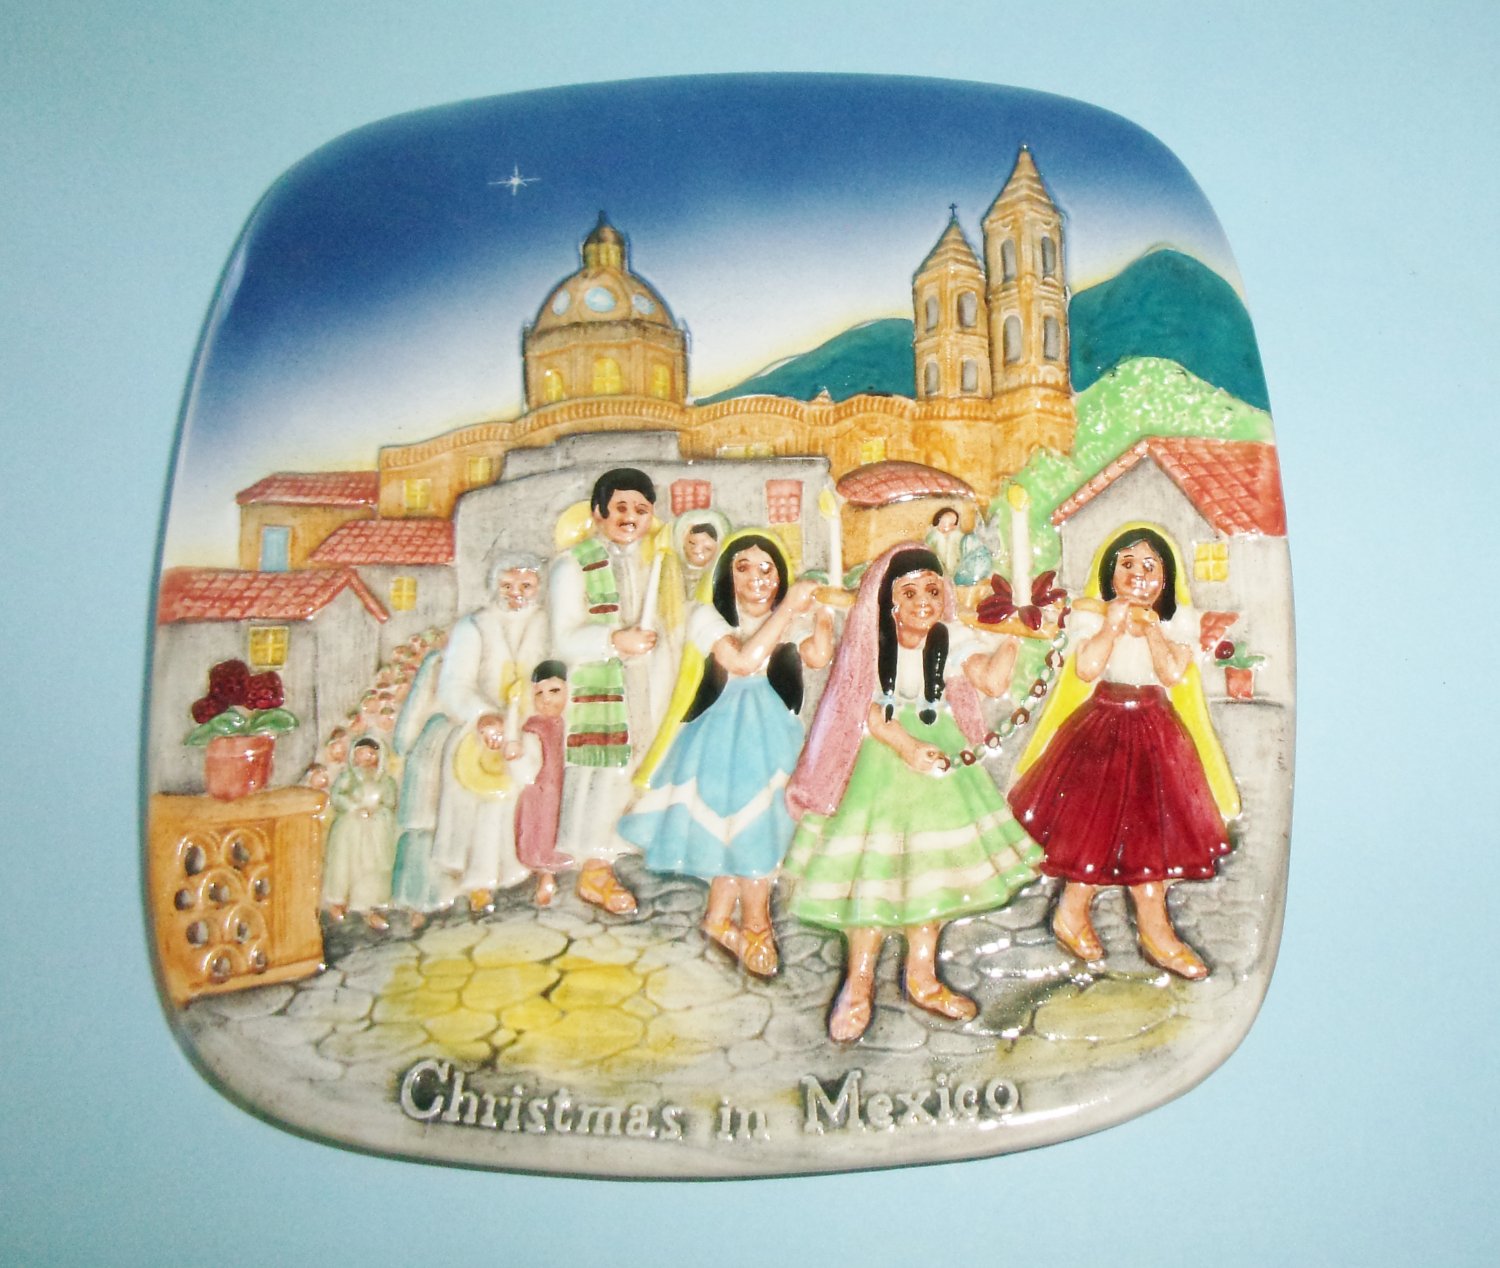 Beswick 1973 Christmas in Mexico Plate Limited Edition Decorative